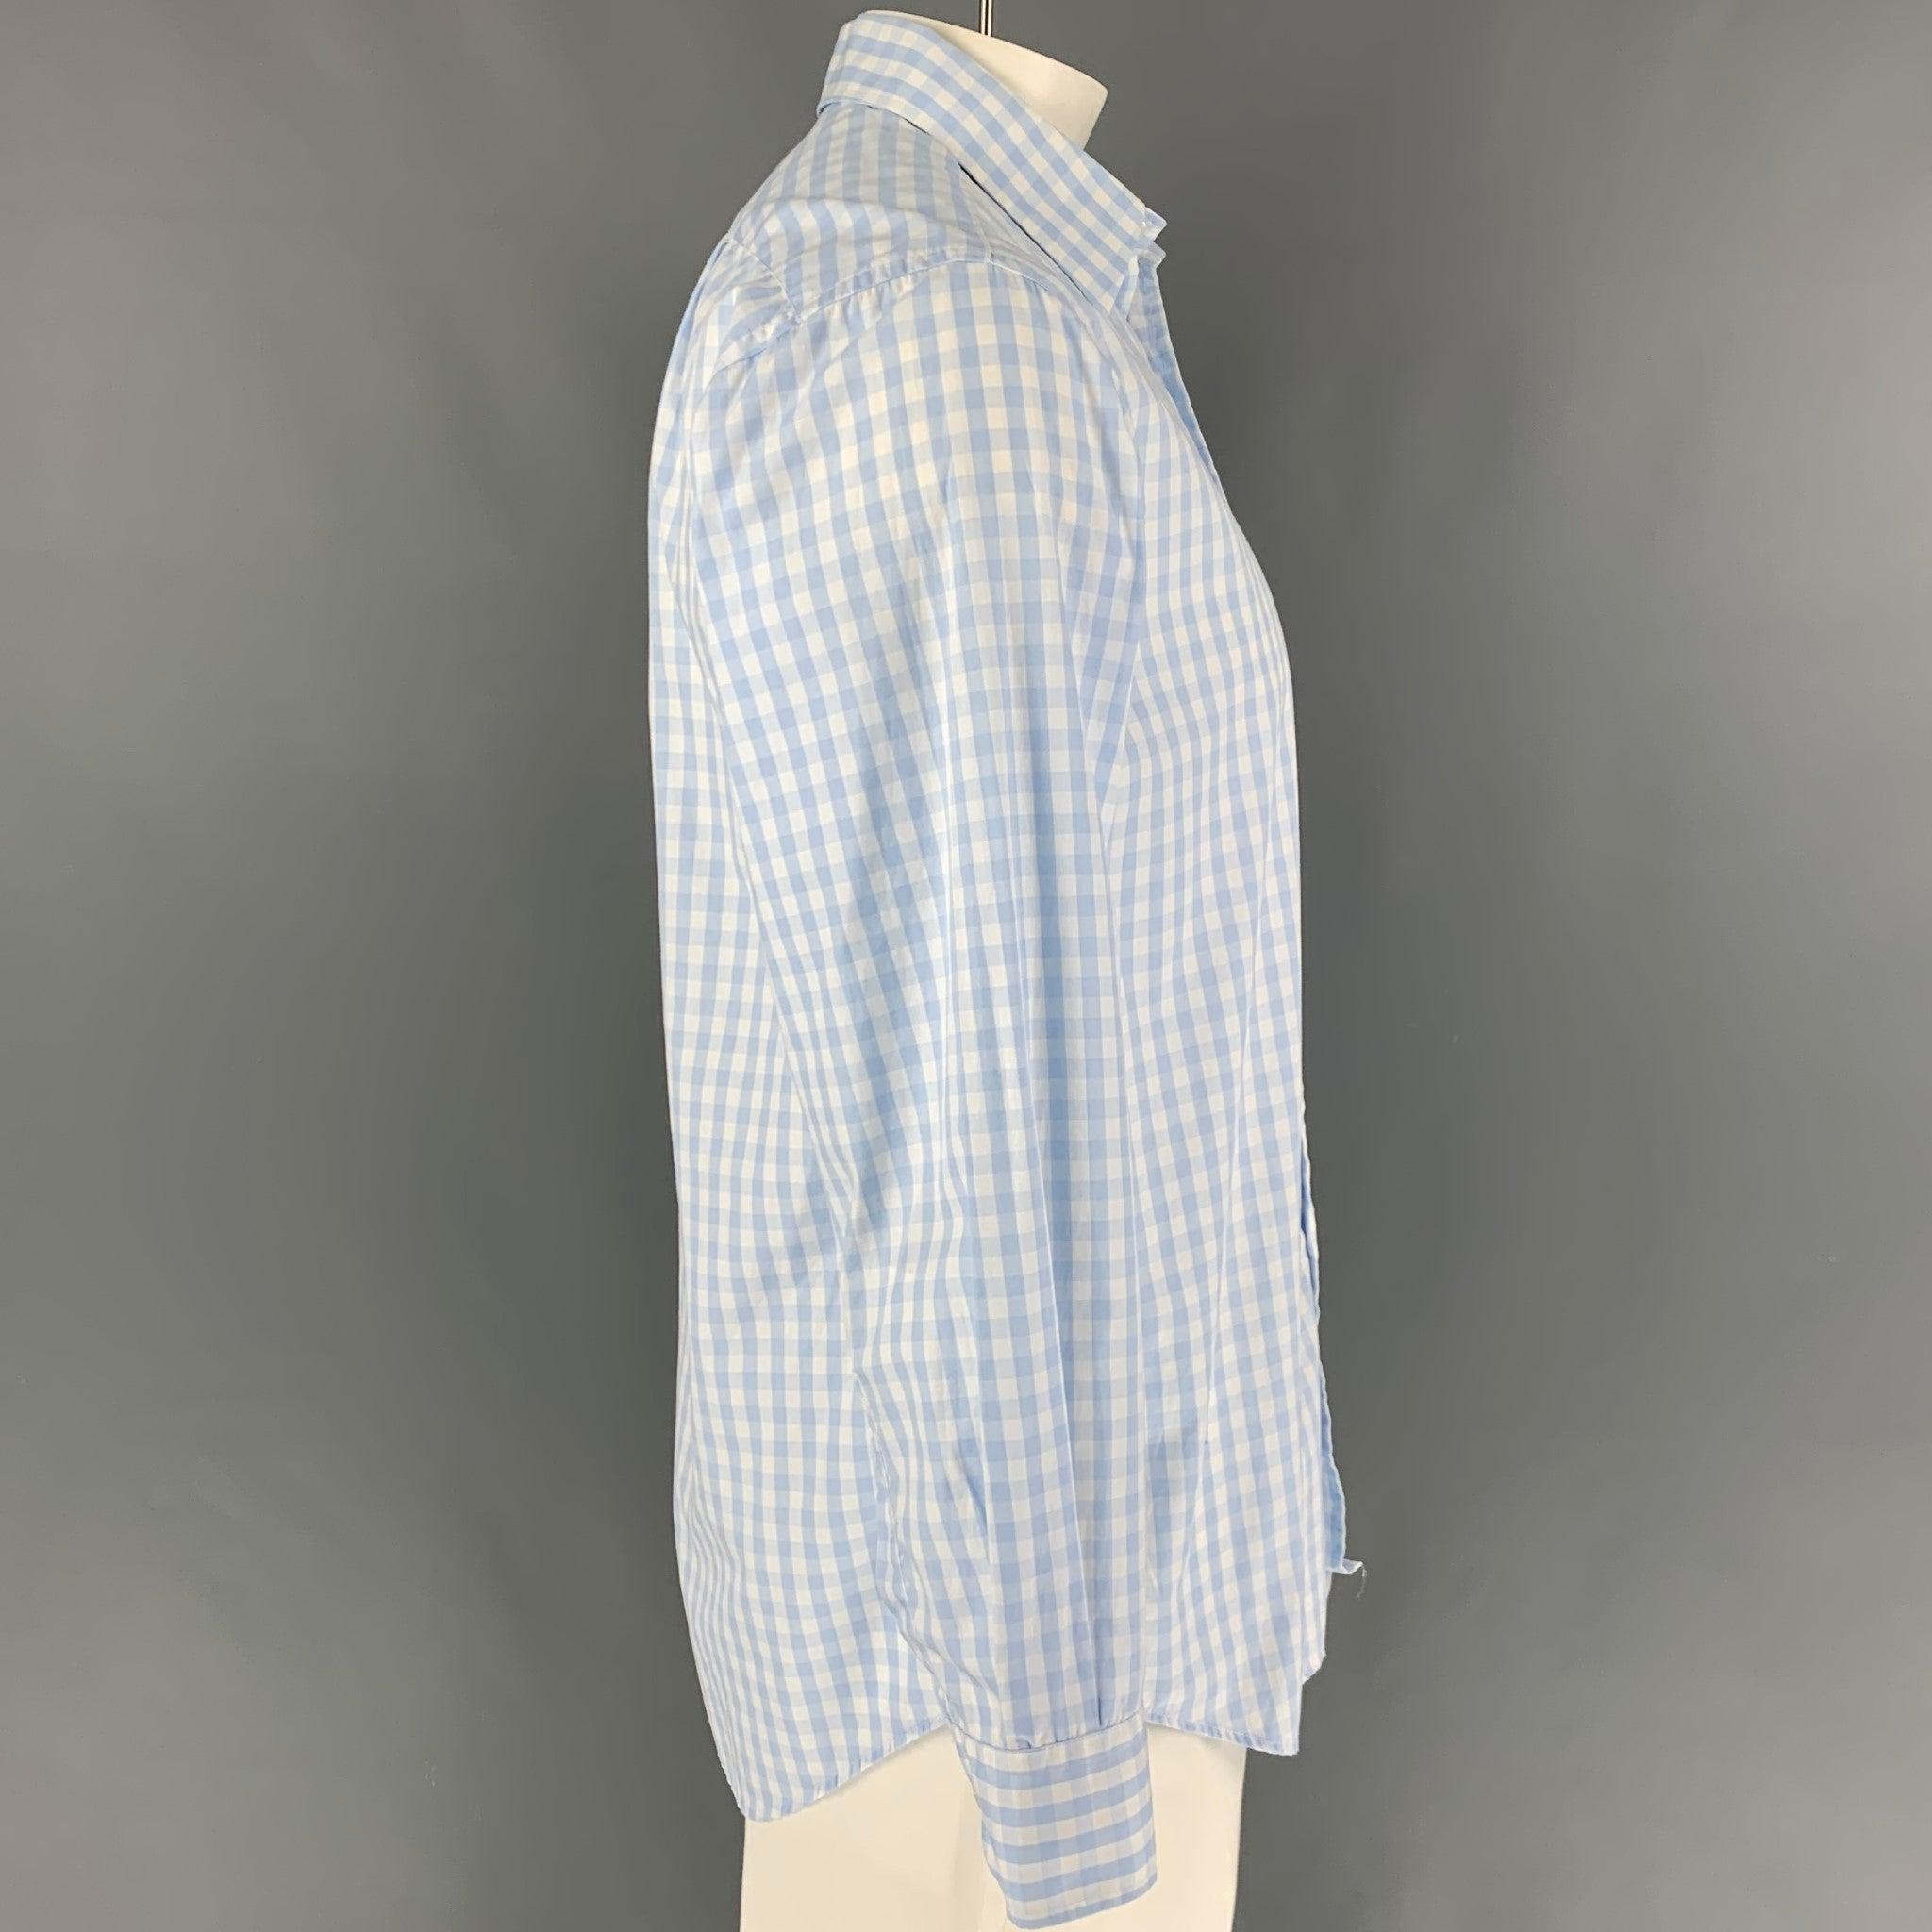 PAUL SMITH long sleeve shirt comes in a light blue & white gingham cotton featuring a spread collar, patch pocket, and a button up closure.
Very Good
Pre-Owned Condition. 

Marked:   16/41 

Measurements: 
 
Shoulder: 19 inches  Chest: 44 inches 